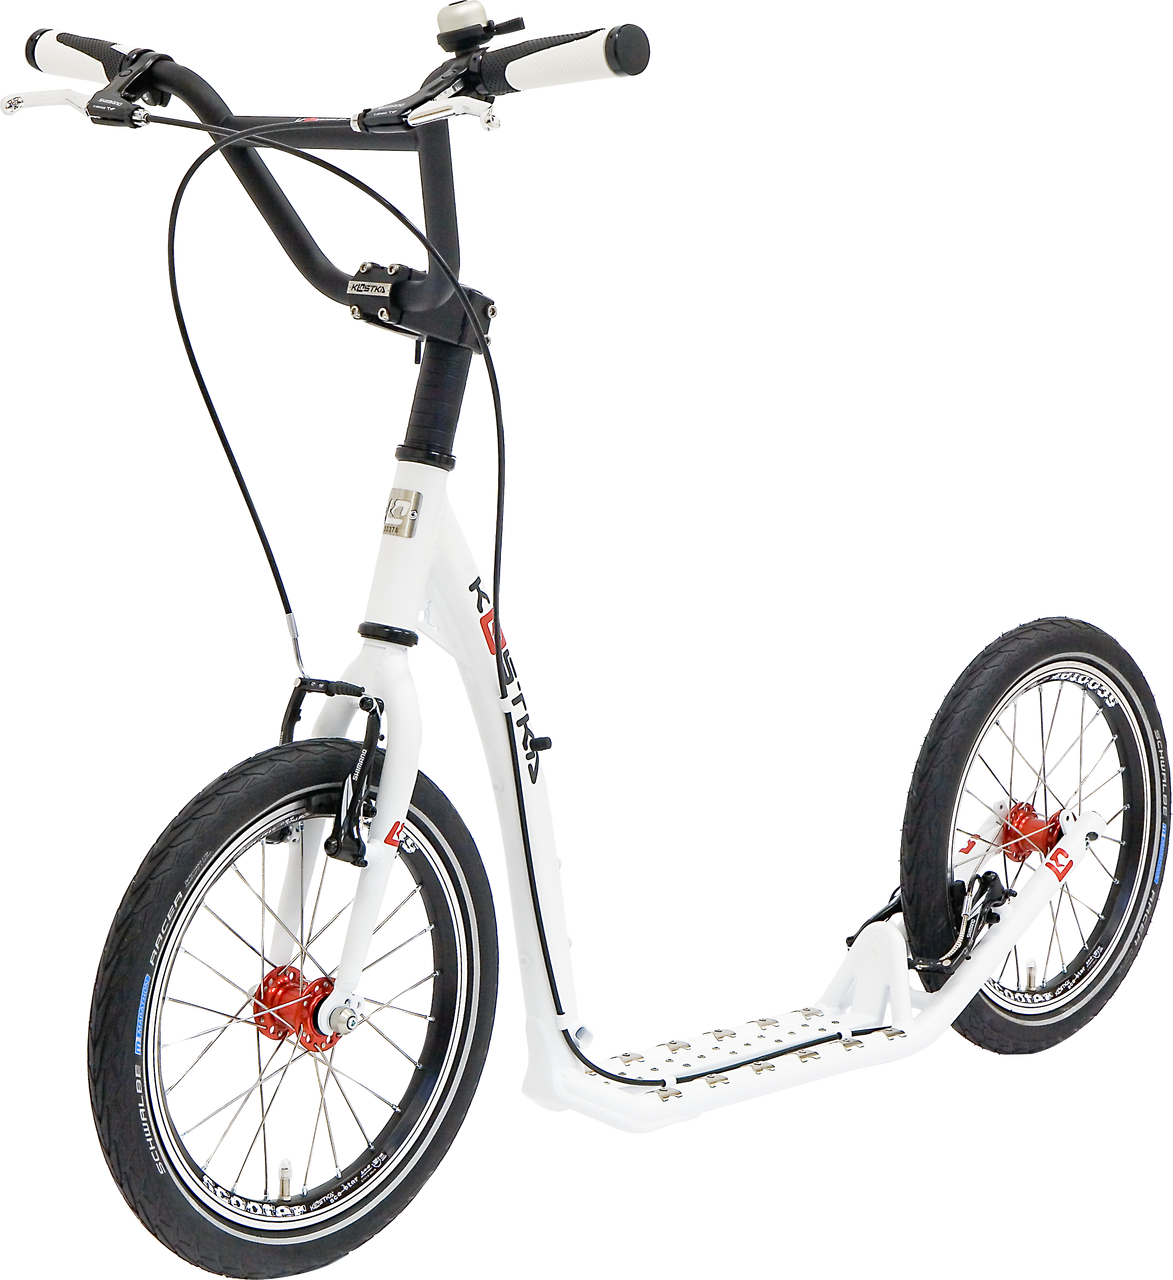 Kick Scooter PNG Image File